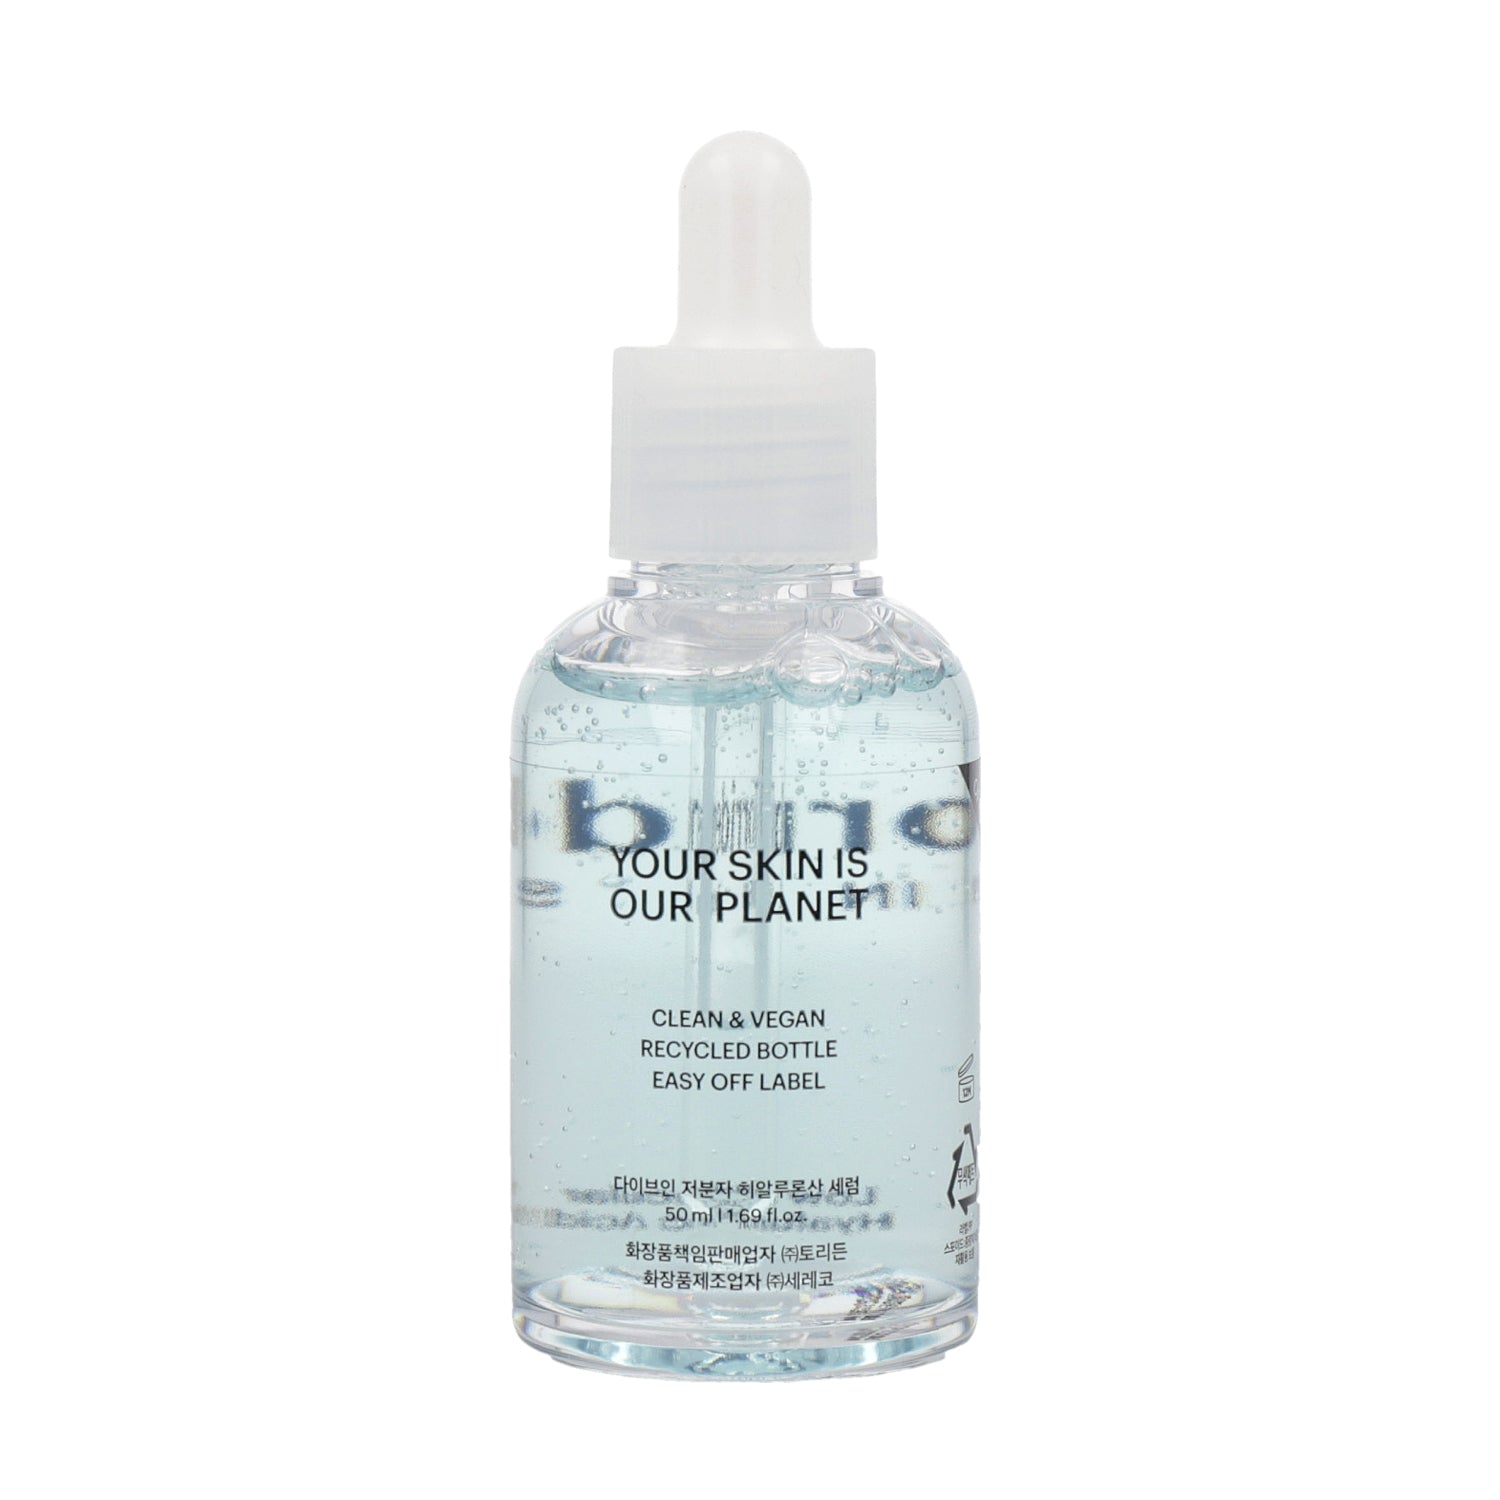 Torriden *renew* Dive-In Low Molecule Hyaluronic Acid Serum 50ml -  Delivers intense and long-lasting hydration to keep the skin plump, soft, and smooth.